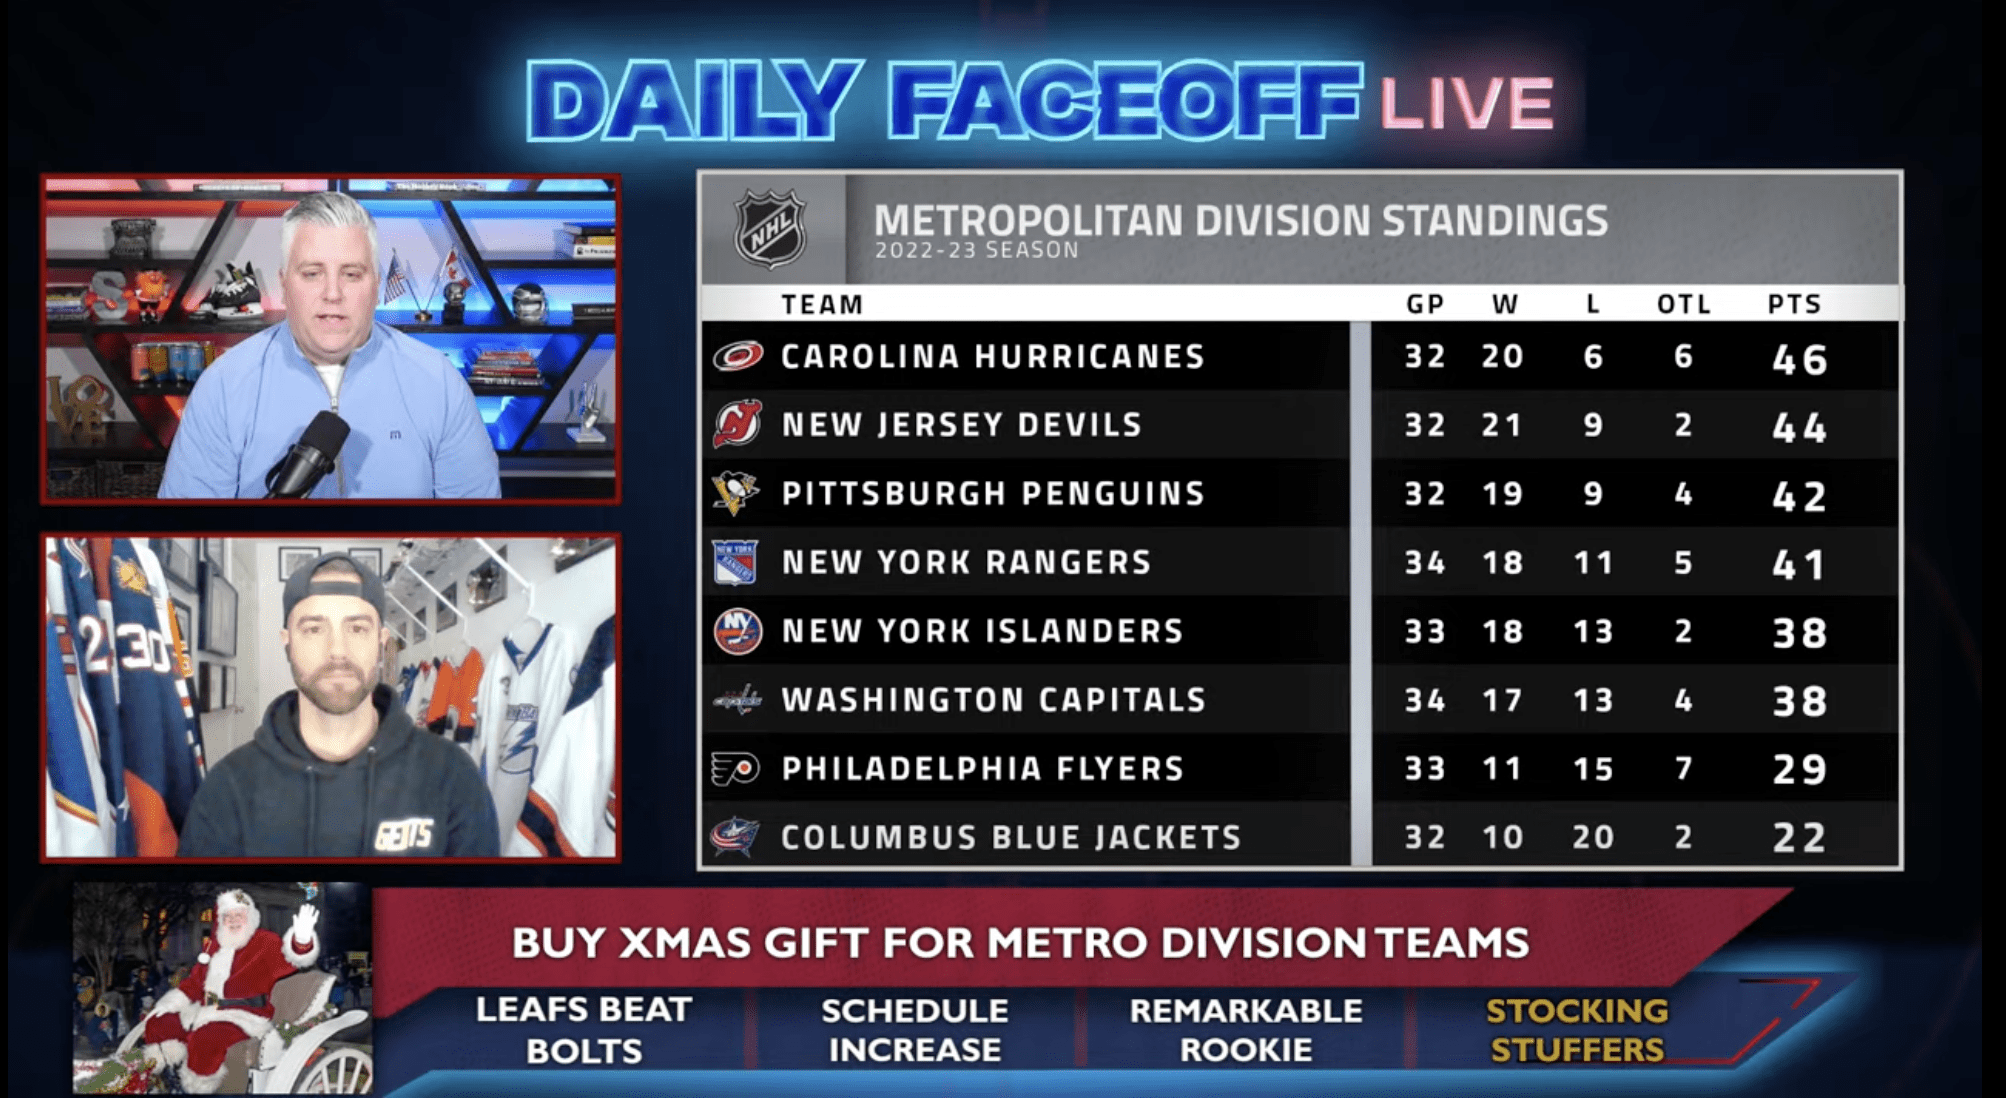 Daily Faceoff Live: Metropolitan Division Stocking Stuffers